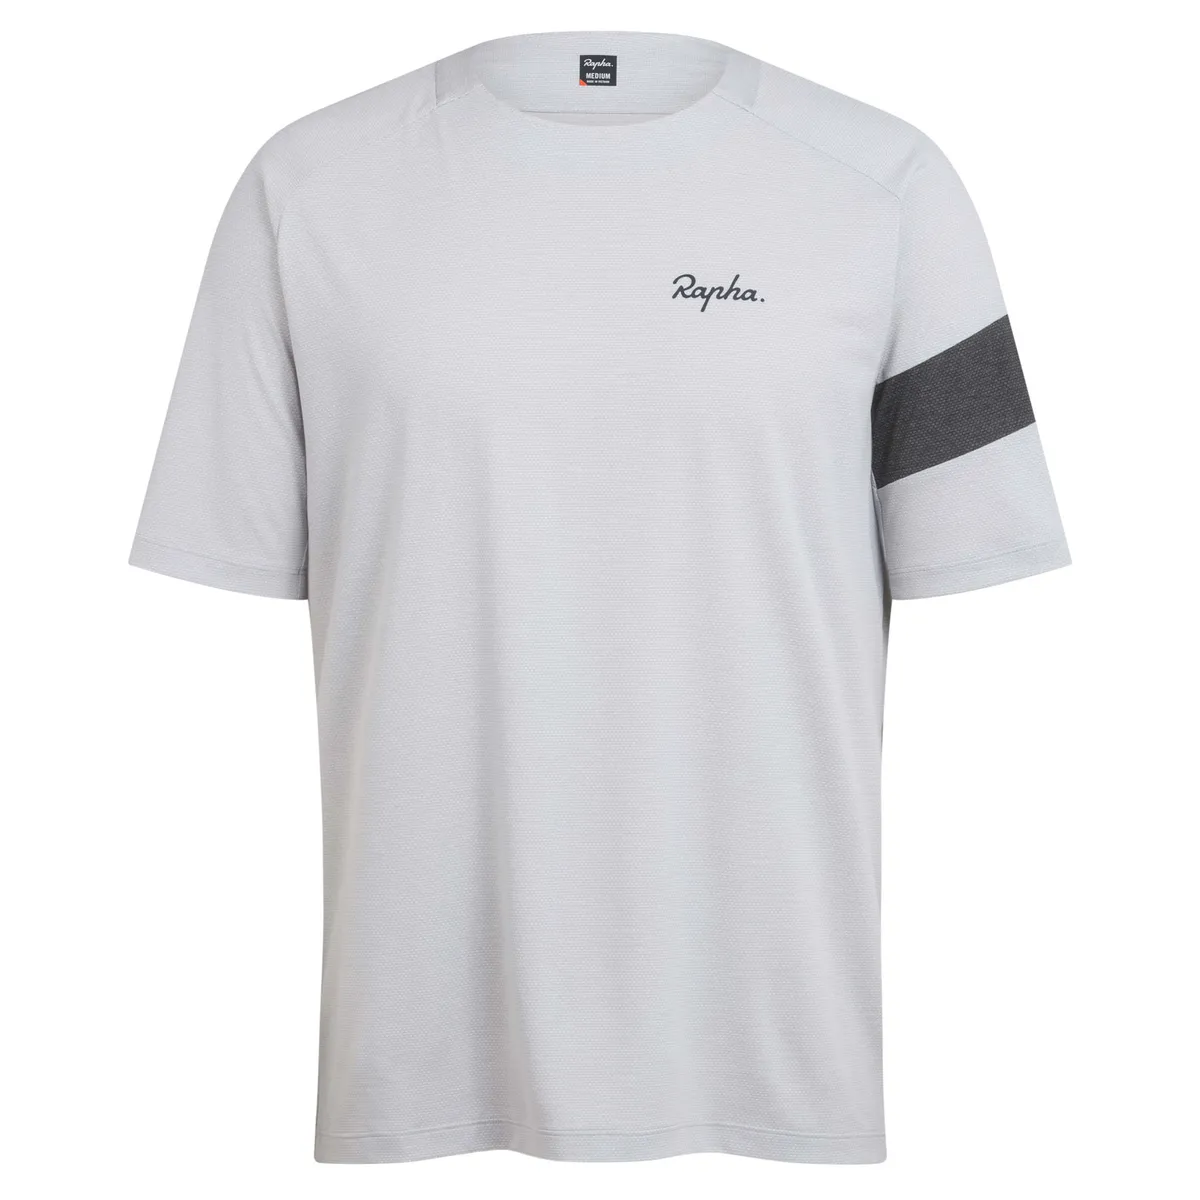 Rapha Trail Technical t-shirt in Micro Chip and Anthracite